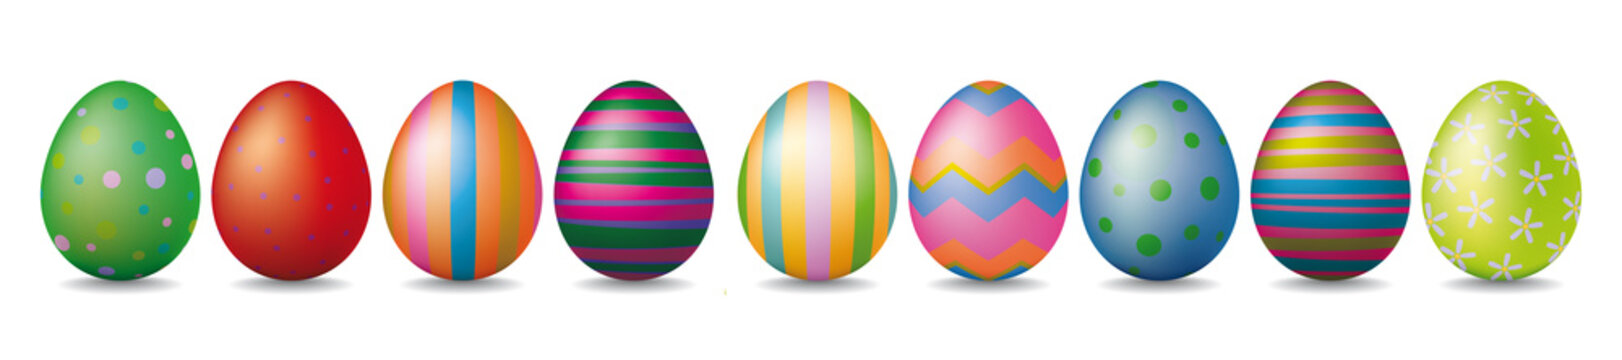 Colorful shiny easter eggs banner vector illustration